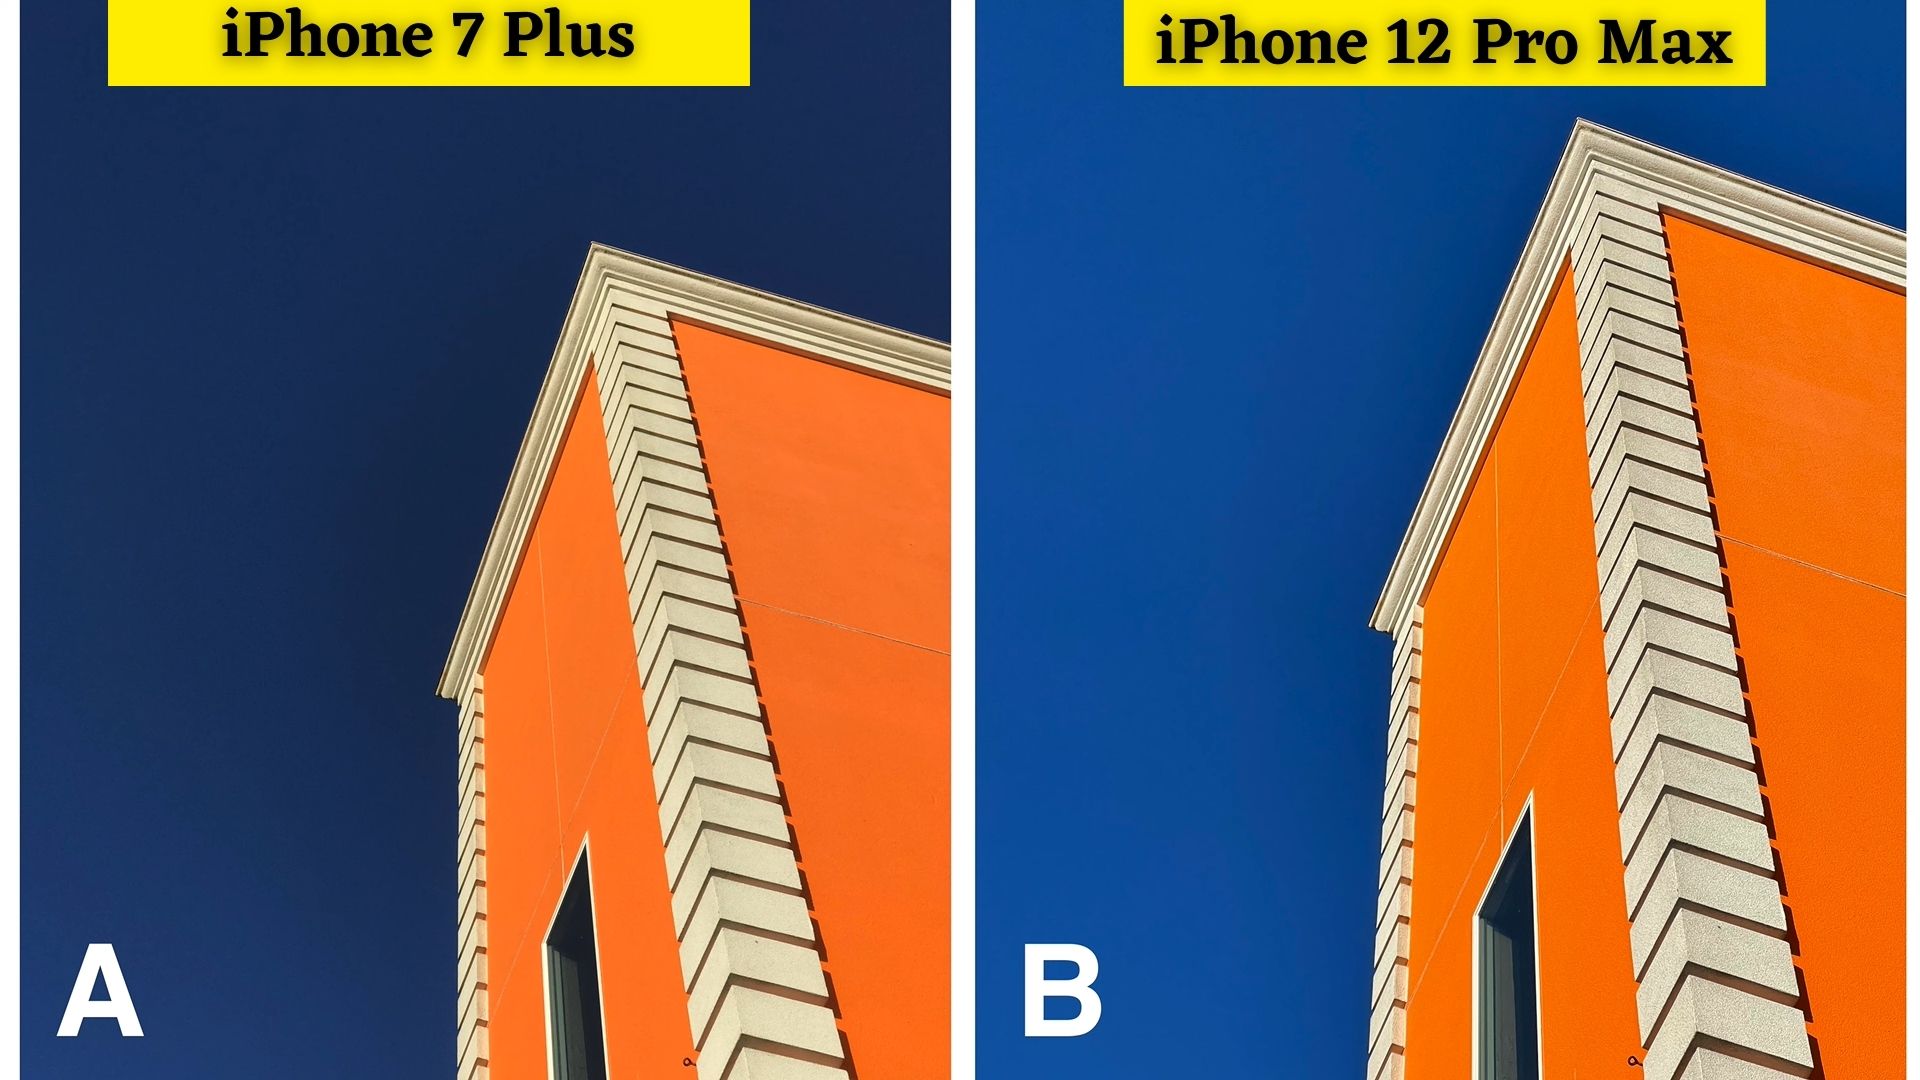 The first pic is clicked from iPhone 7 Plus and the second pic is captured from iPhone 12 Pro Max 